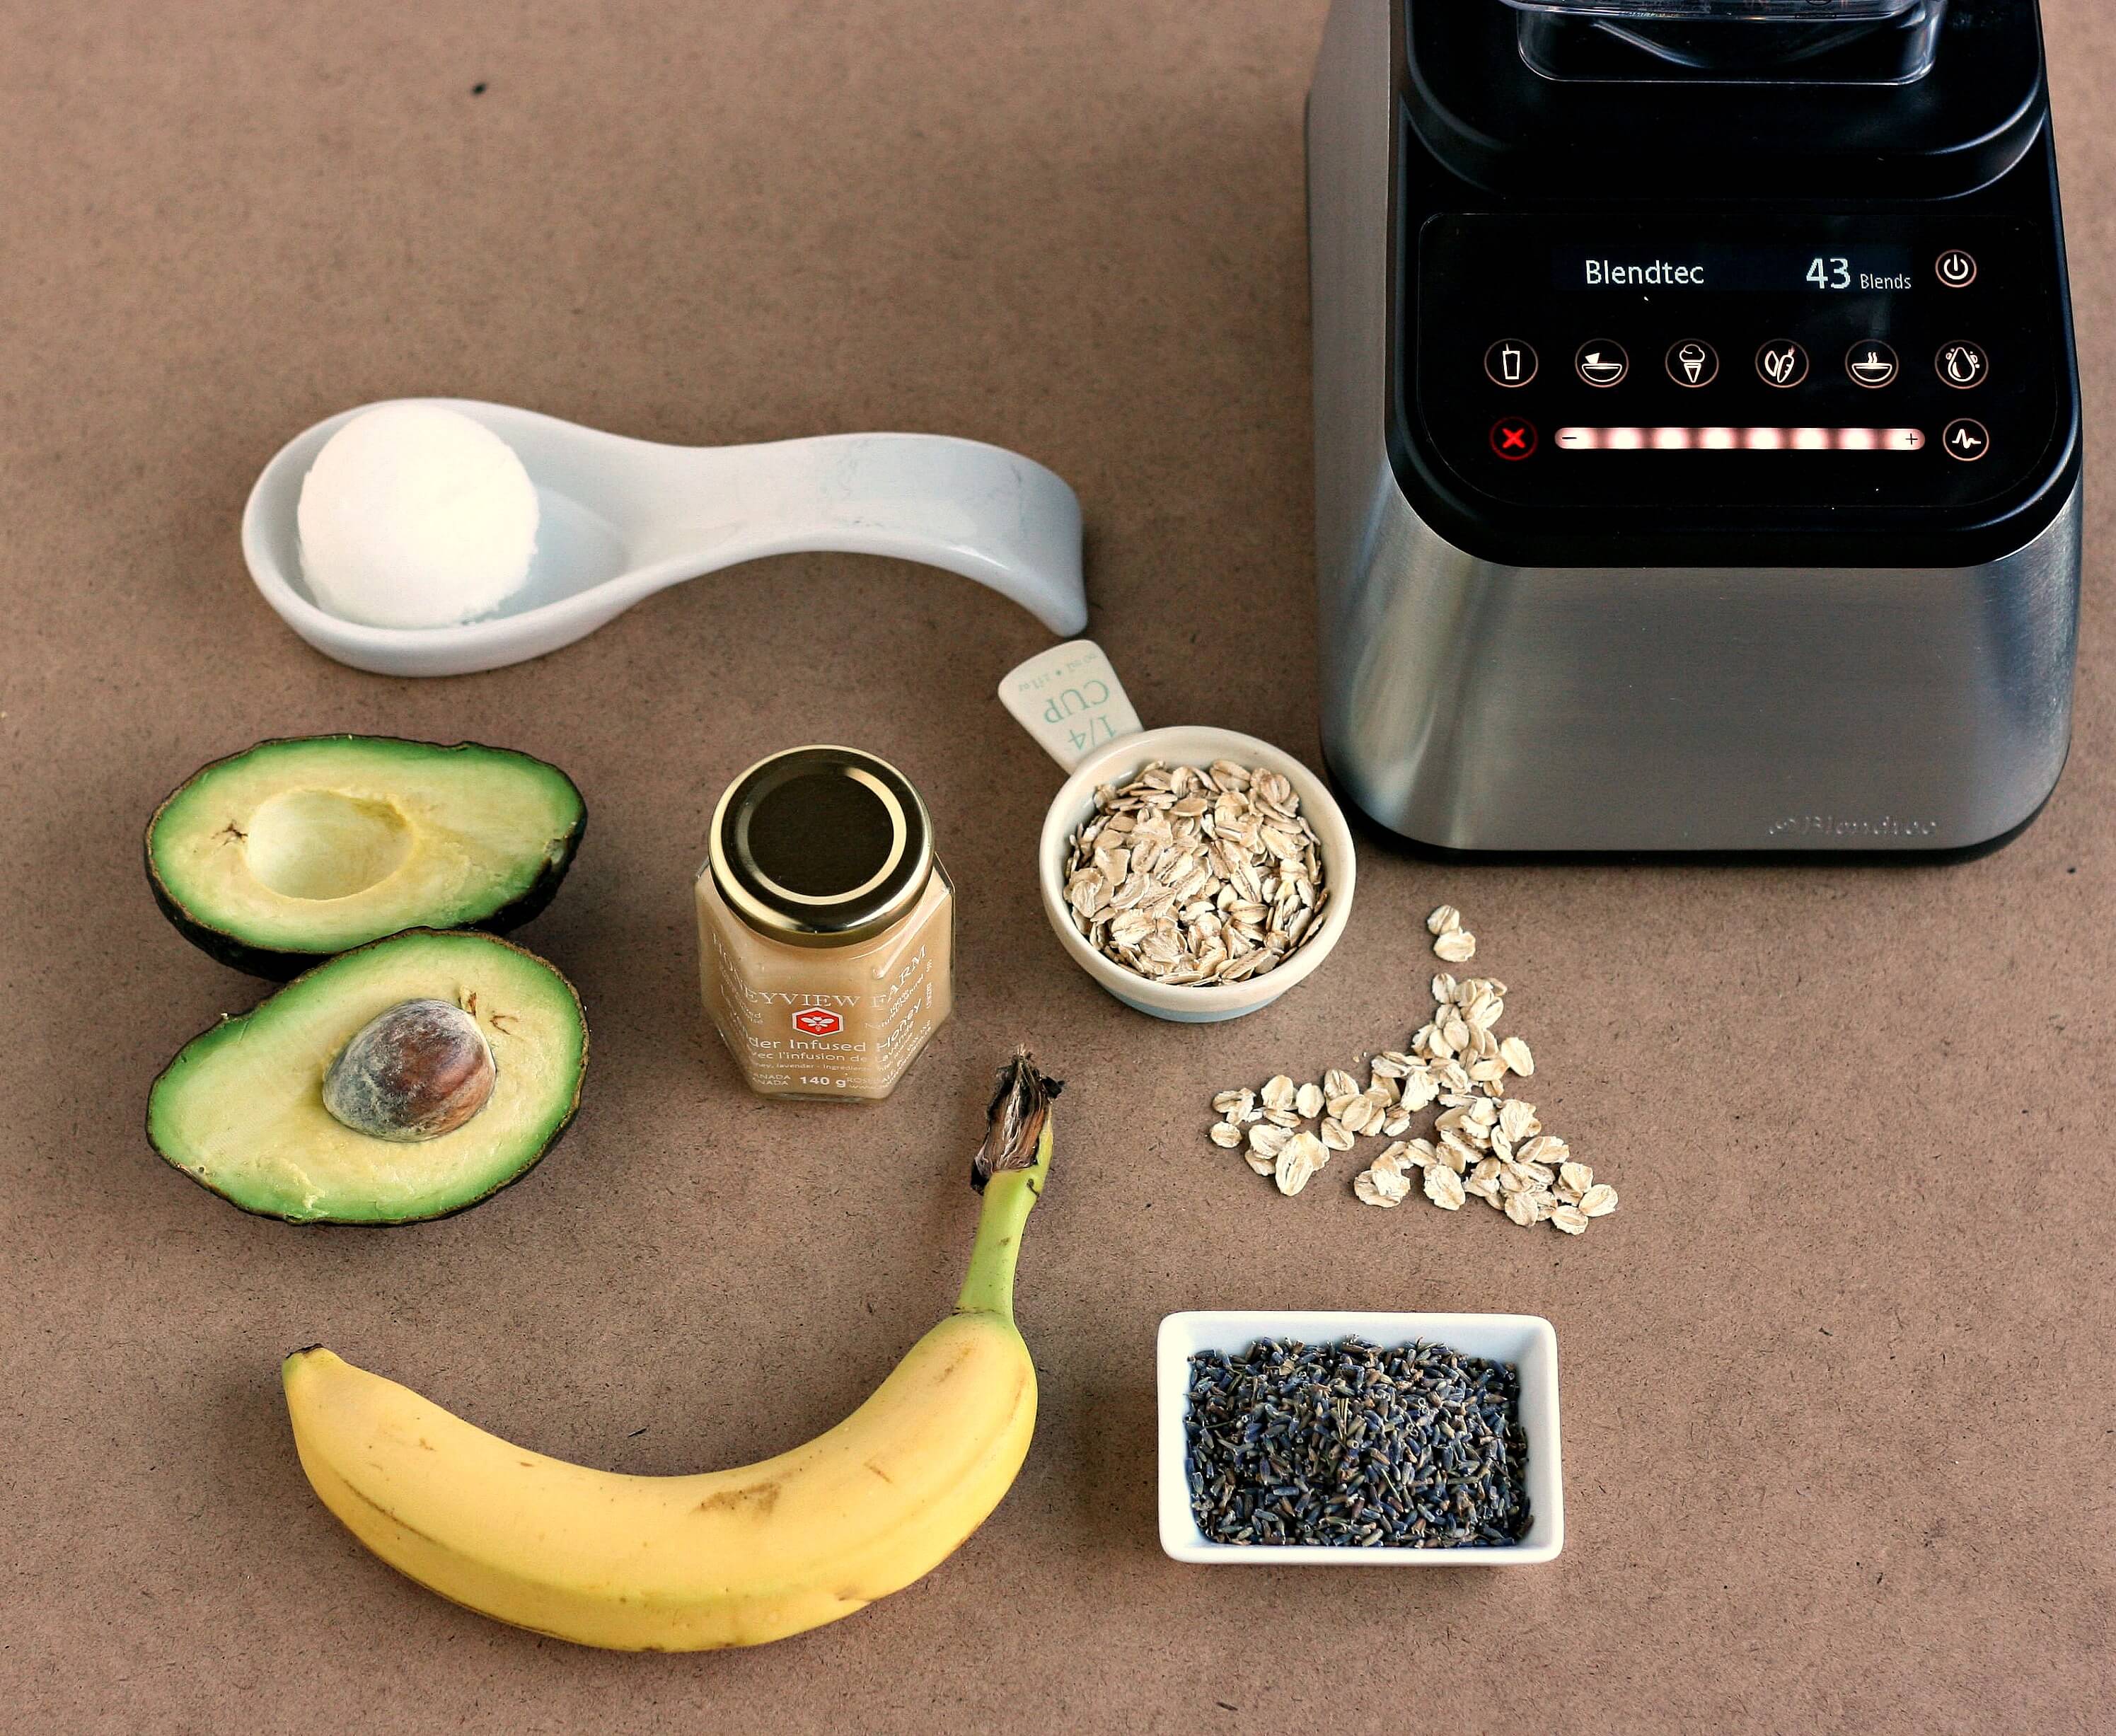 This Easy DIY Blender Face Mask leaves you with radiant moisturized skin. Contains Avocado, avocado seed, honey, oatmeal, banana and lavender.